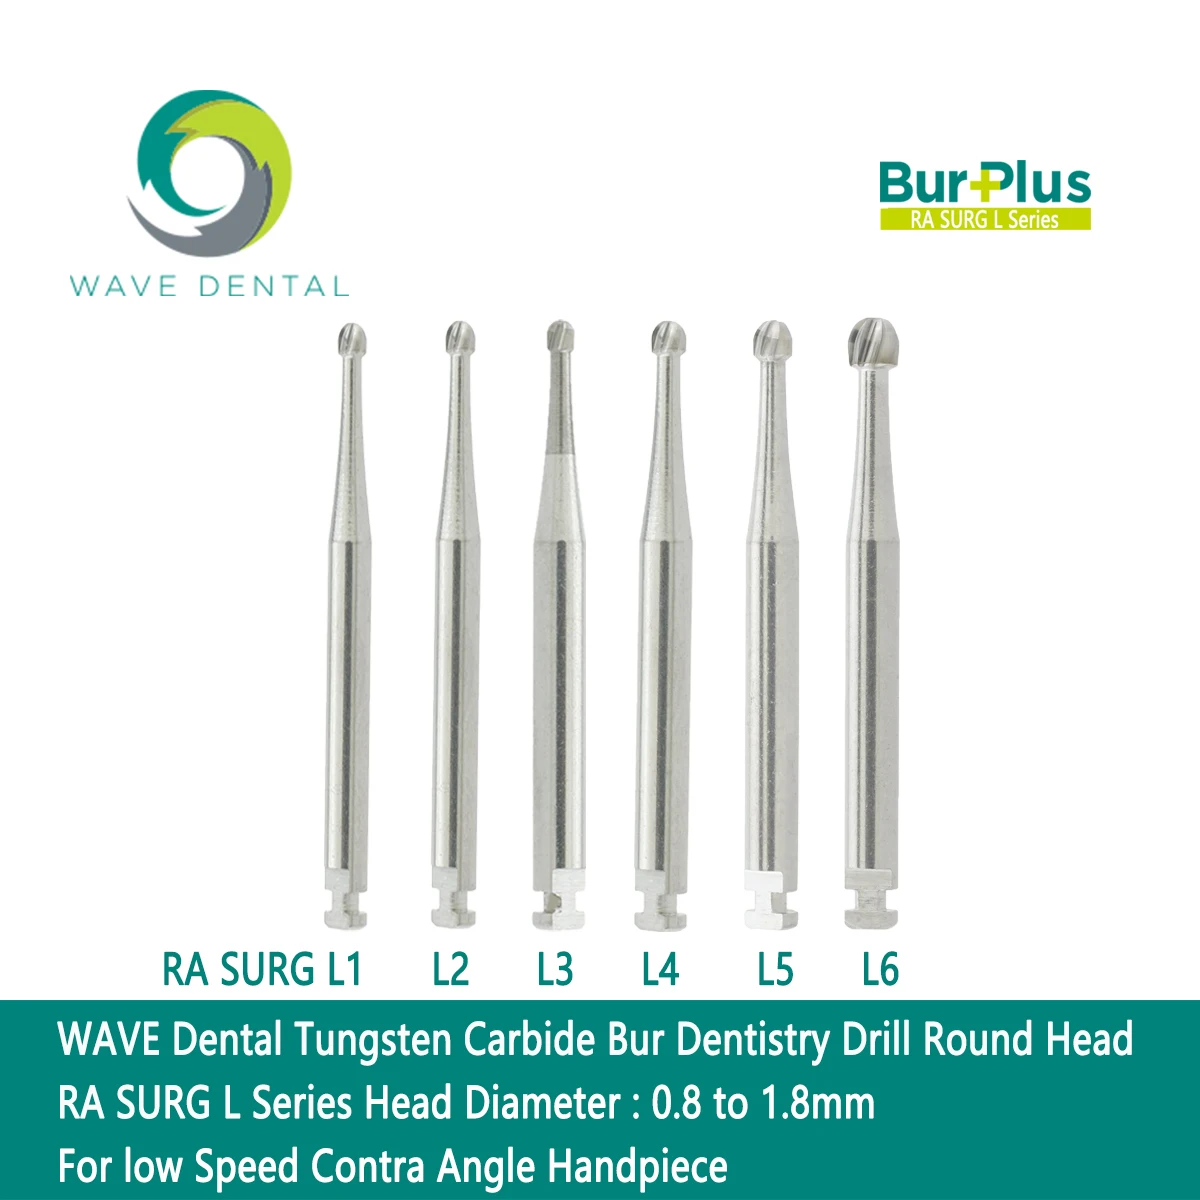 

WAVE Dental Tungsten Carbide Bur Dentistry Drill Round Head RA SURG L Series Head:0.8 to 1.8mm low Speed Contra Angle Handpiece